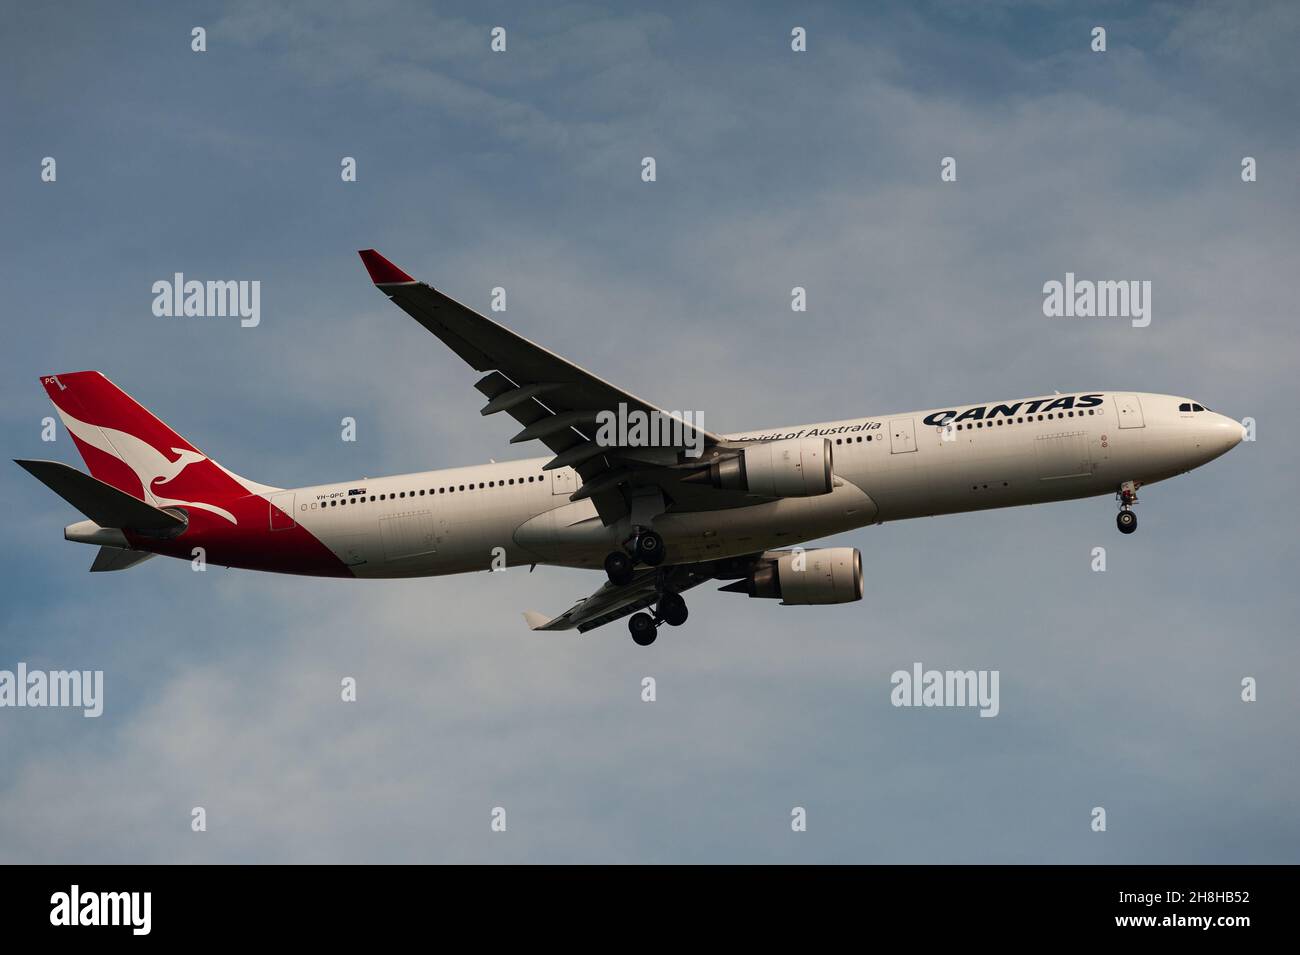 29.11.2021, Singapore, Republic of Singapore, Asia - Airbus A330 passenger aircraft of the Australian airline Qantas Airways approaches Changi Airport. Stock Photo